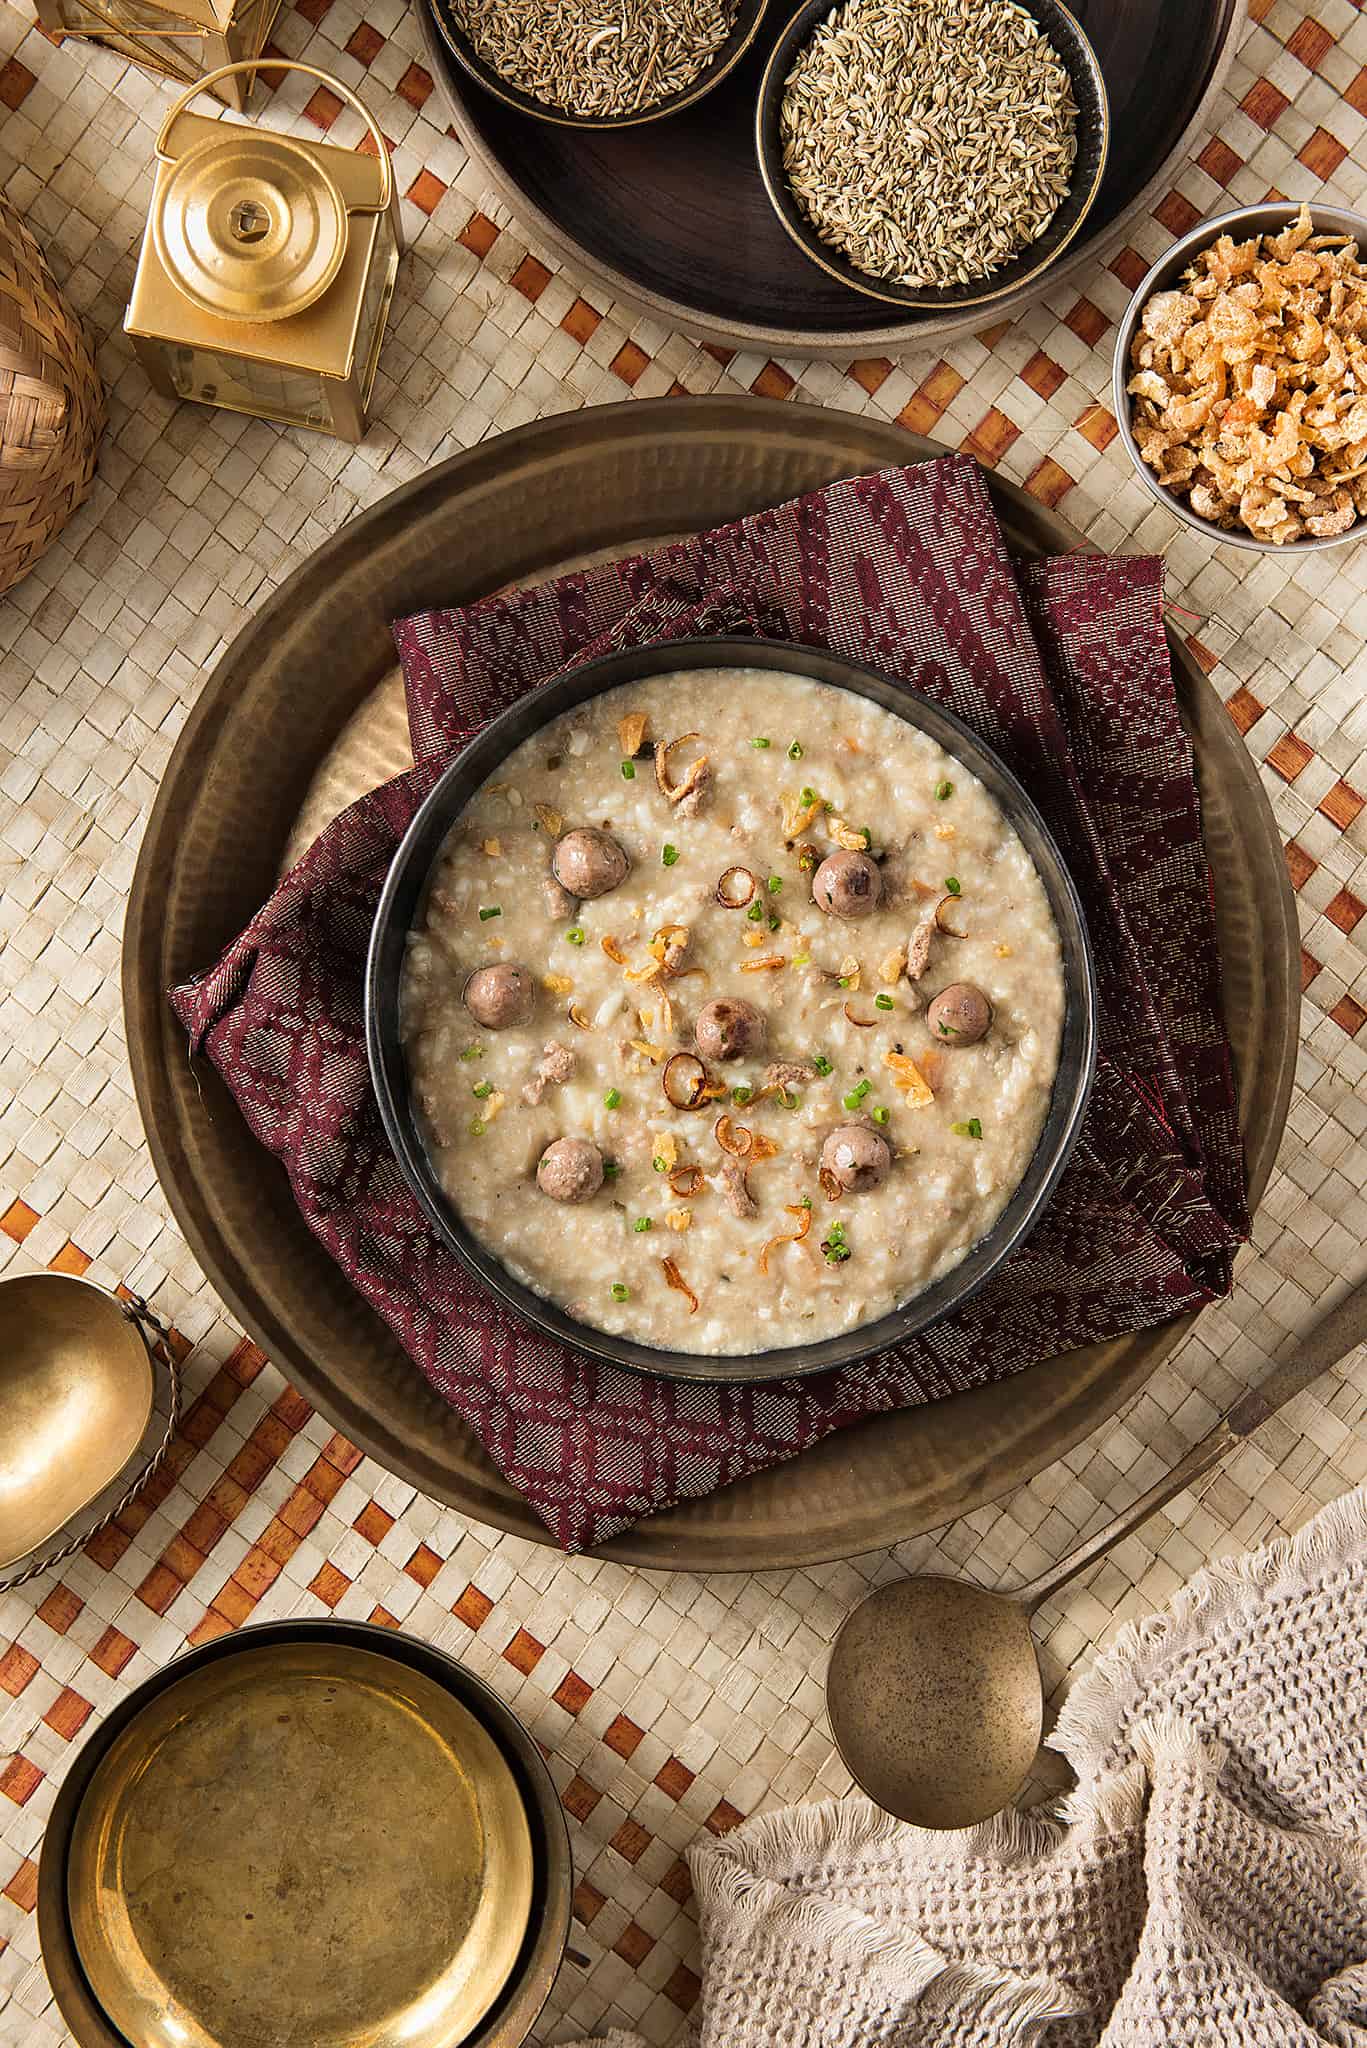 Beef Porridge infused with Coconut Milk and Spices Image